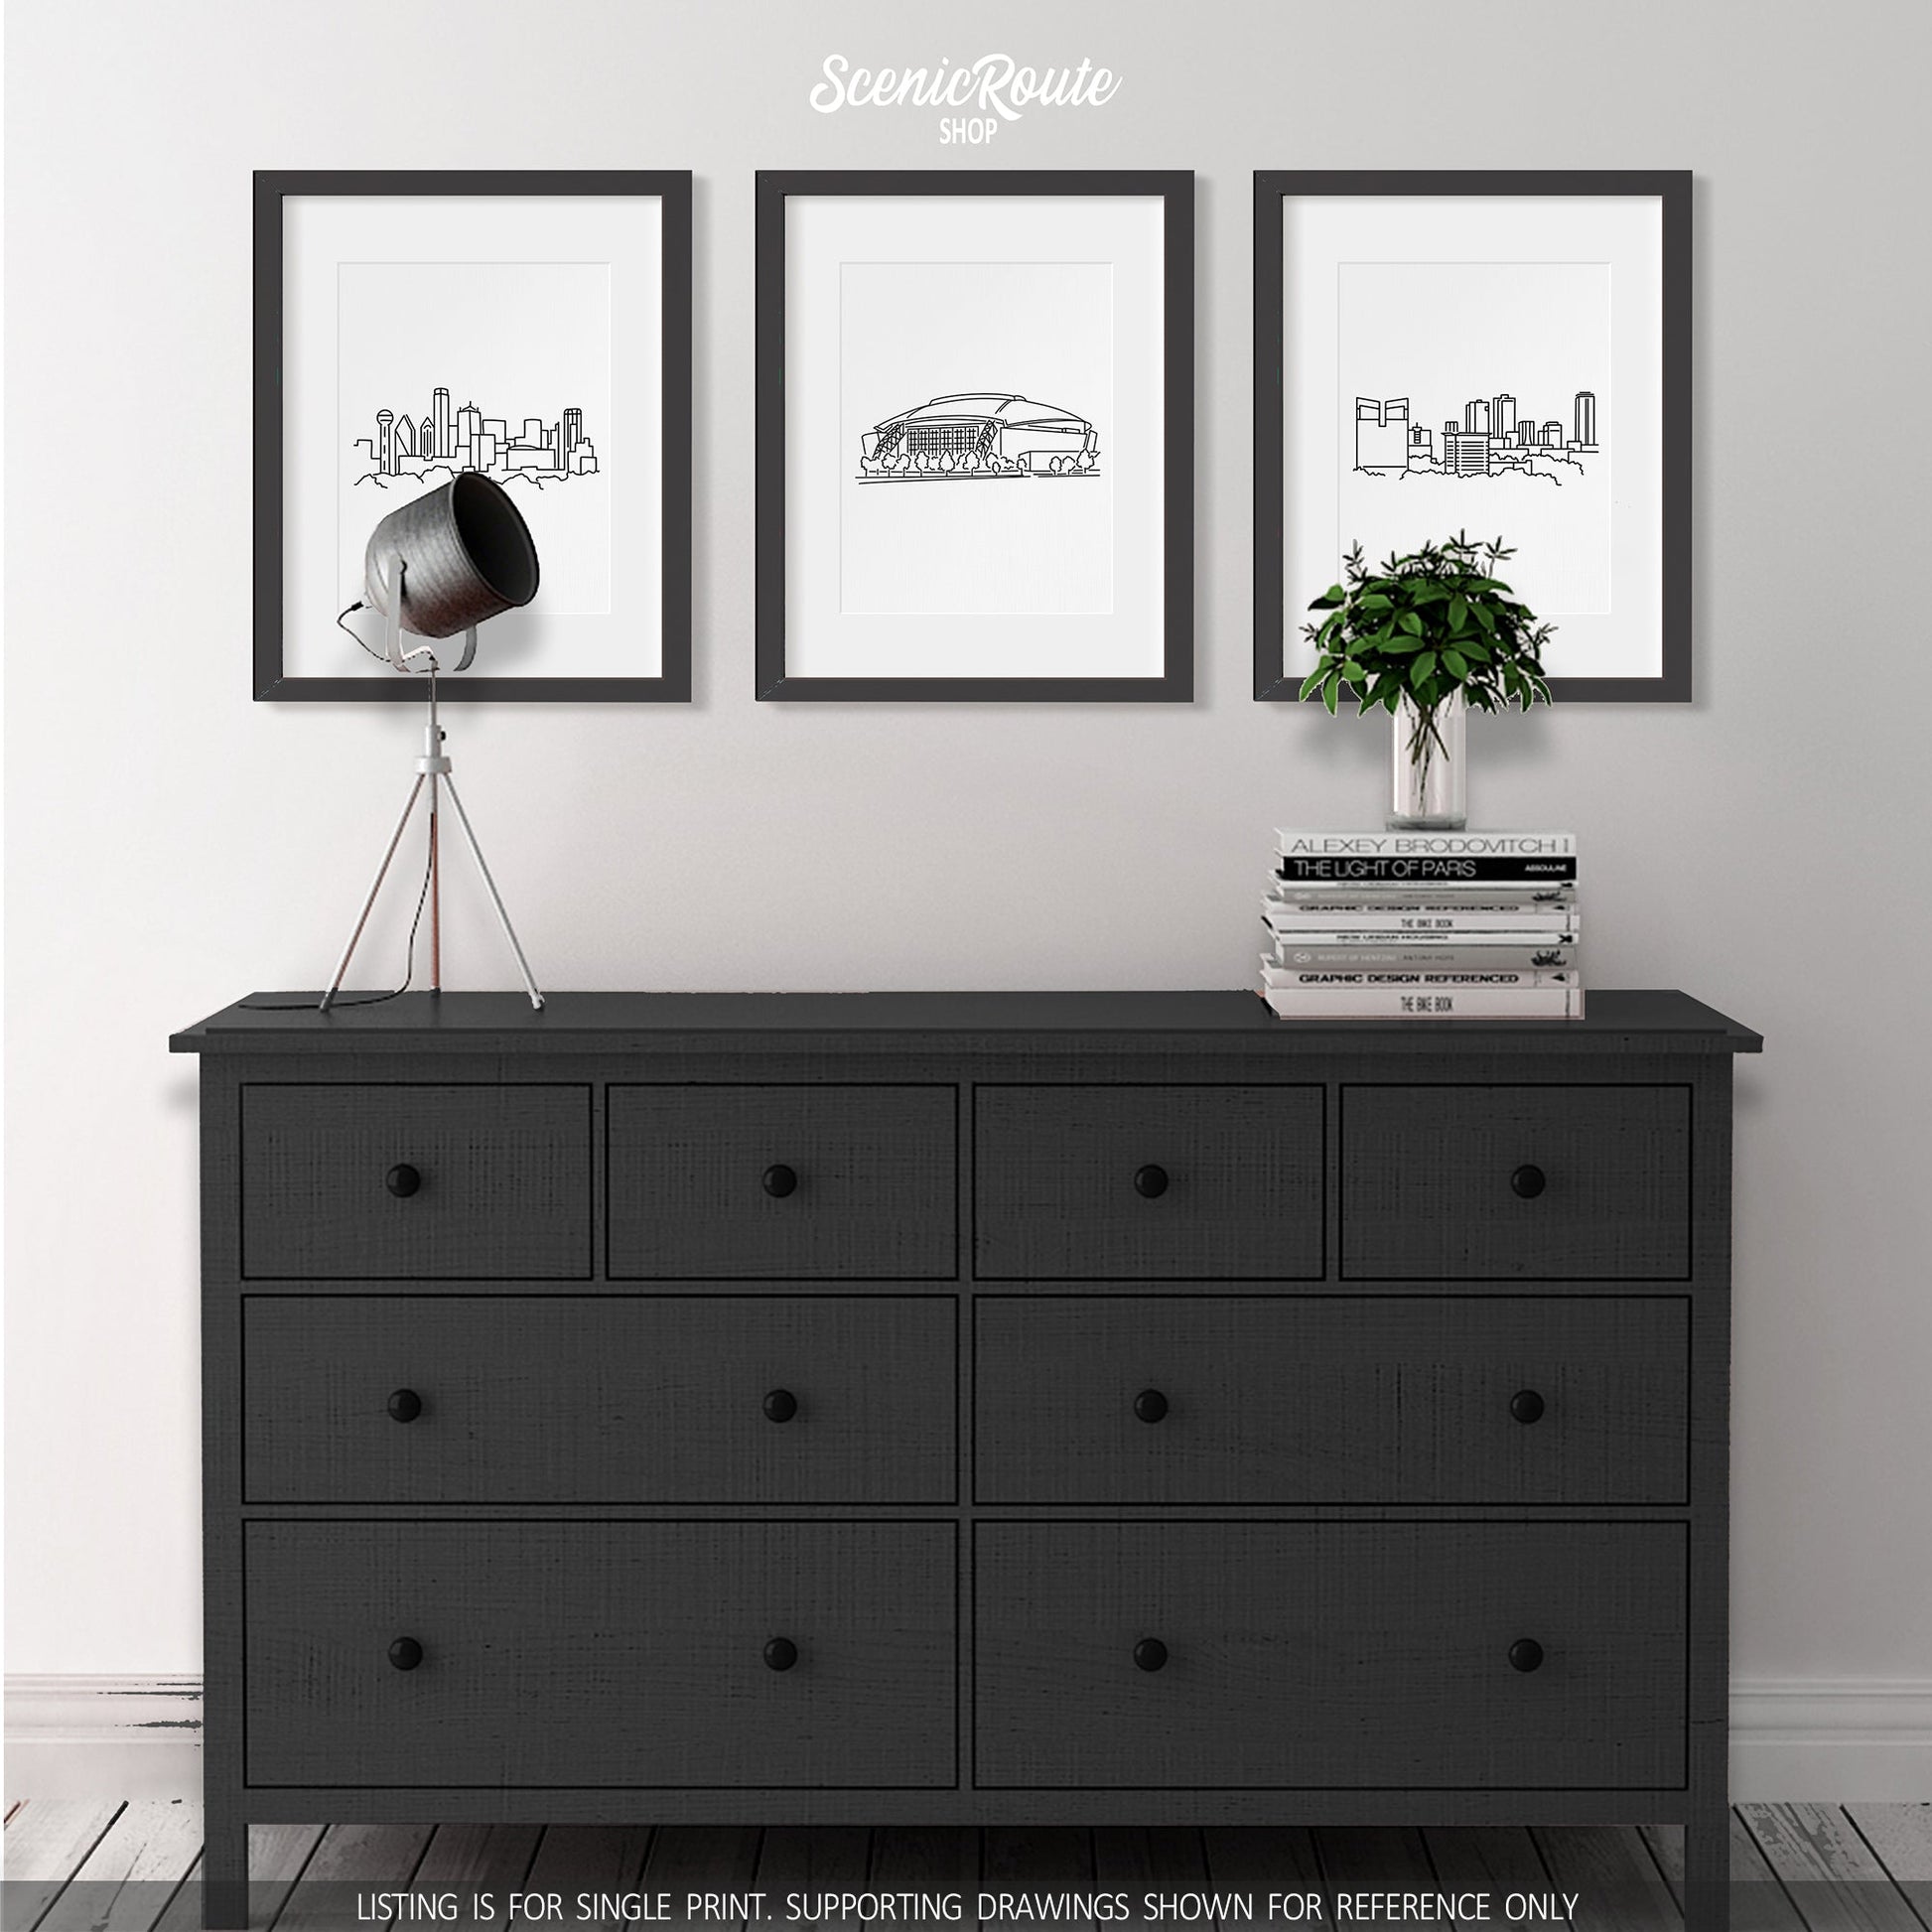 A group of three framed drawings hanging above a dresser with books and a plant. The line art drawings include the Dallas Skyline, Cowboys Stadium, and Fort Worth Skyline